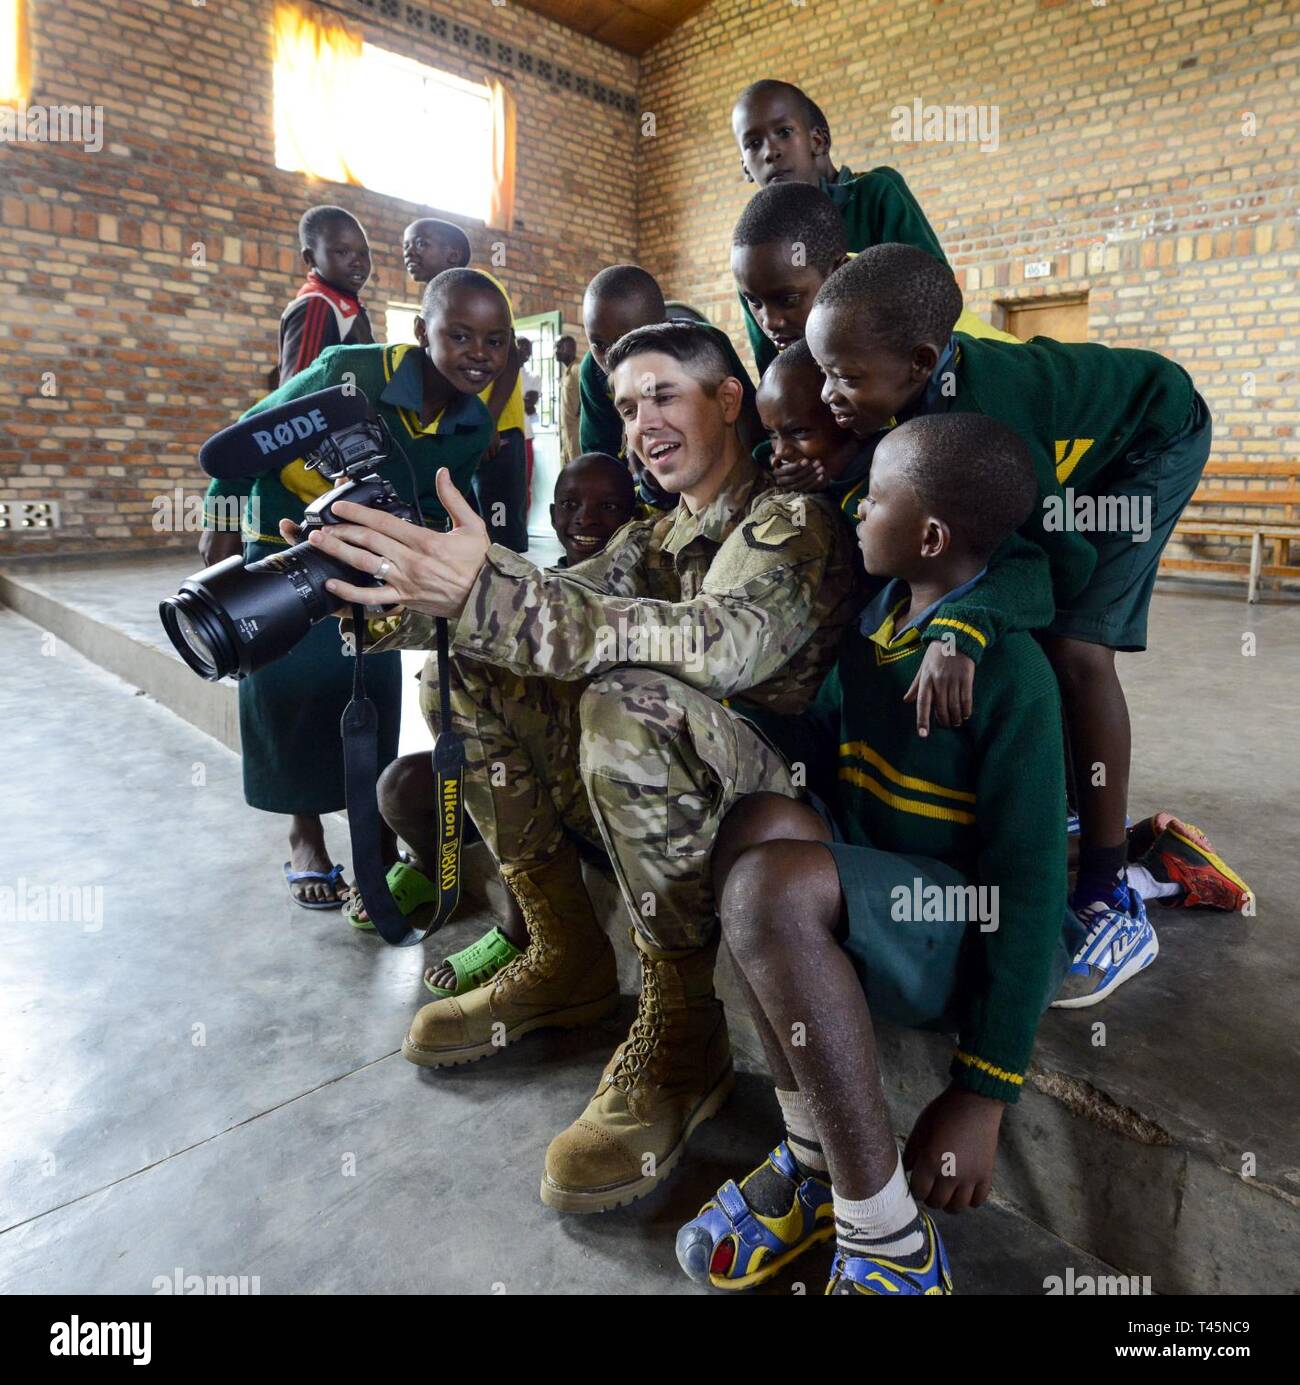 U.S. Air Force Airman 1st Class Noah Coger, a broadcast journalist with the 86th Airlift Wing public affairs office, shows video to some students of the Home de la vierge des Pauvres Gatagara/Nyanza in the Nyanza District, Rwanda, March 5, 2019. Coger traveled to HVP Nyanza with the U.S. Air Forces in Europe Band, who performed a musical concert for the students. Stock Photo